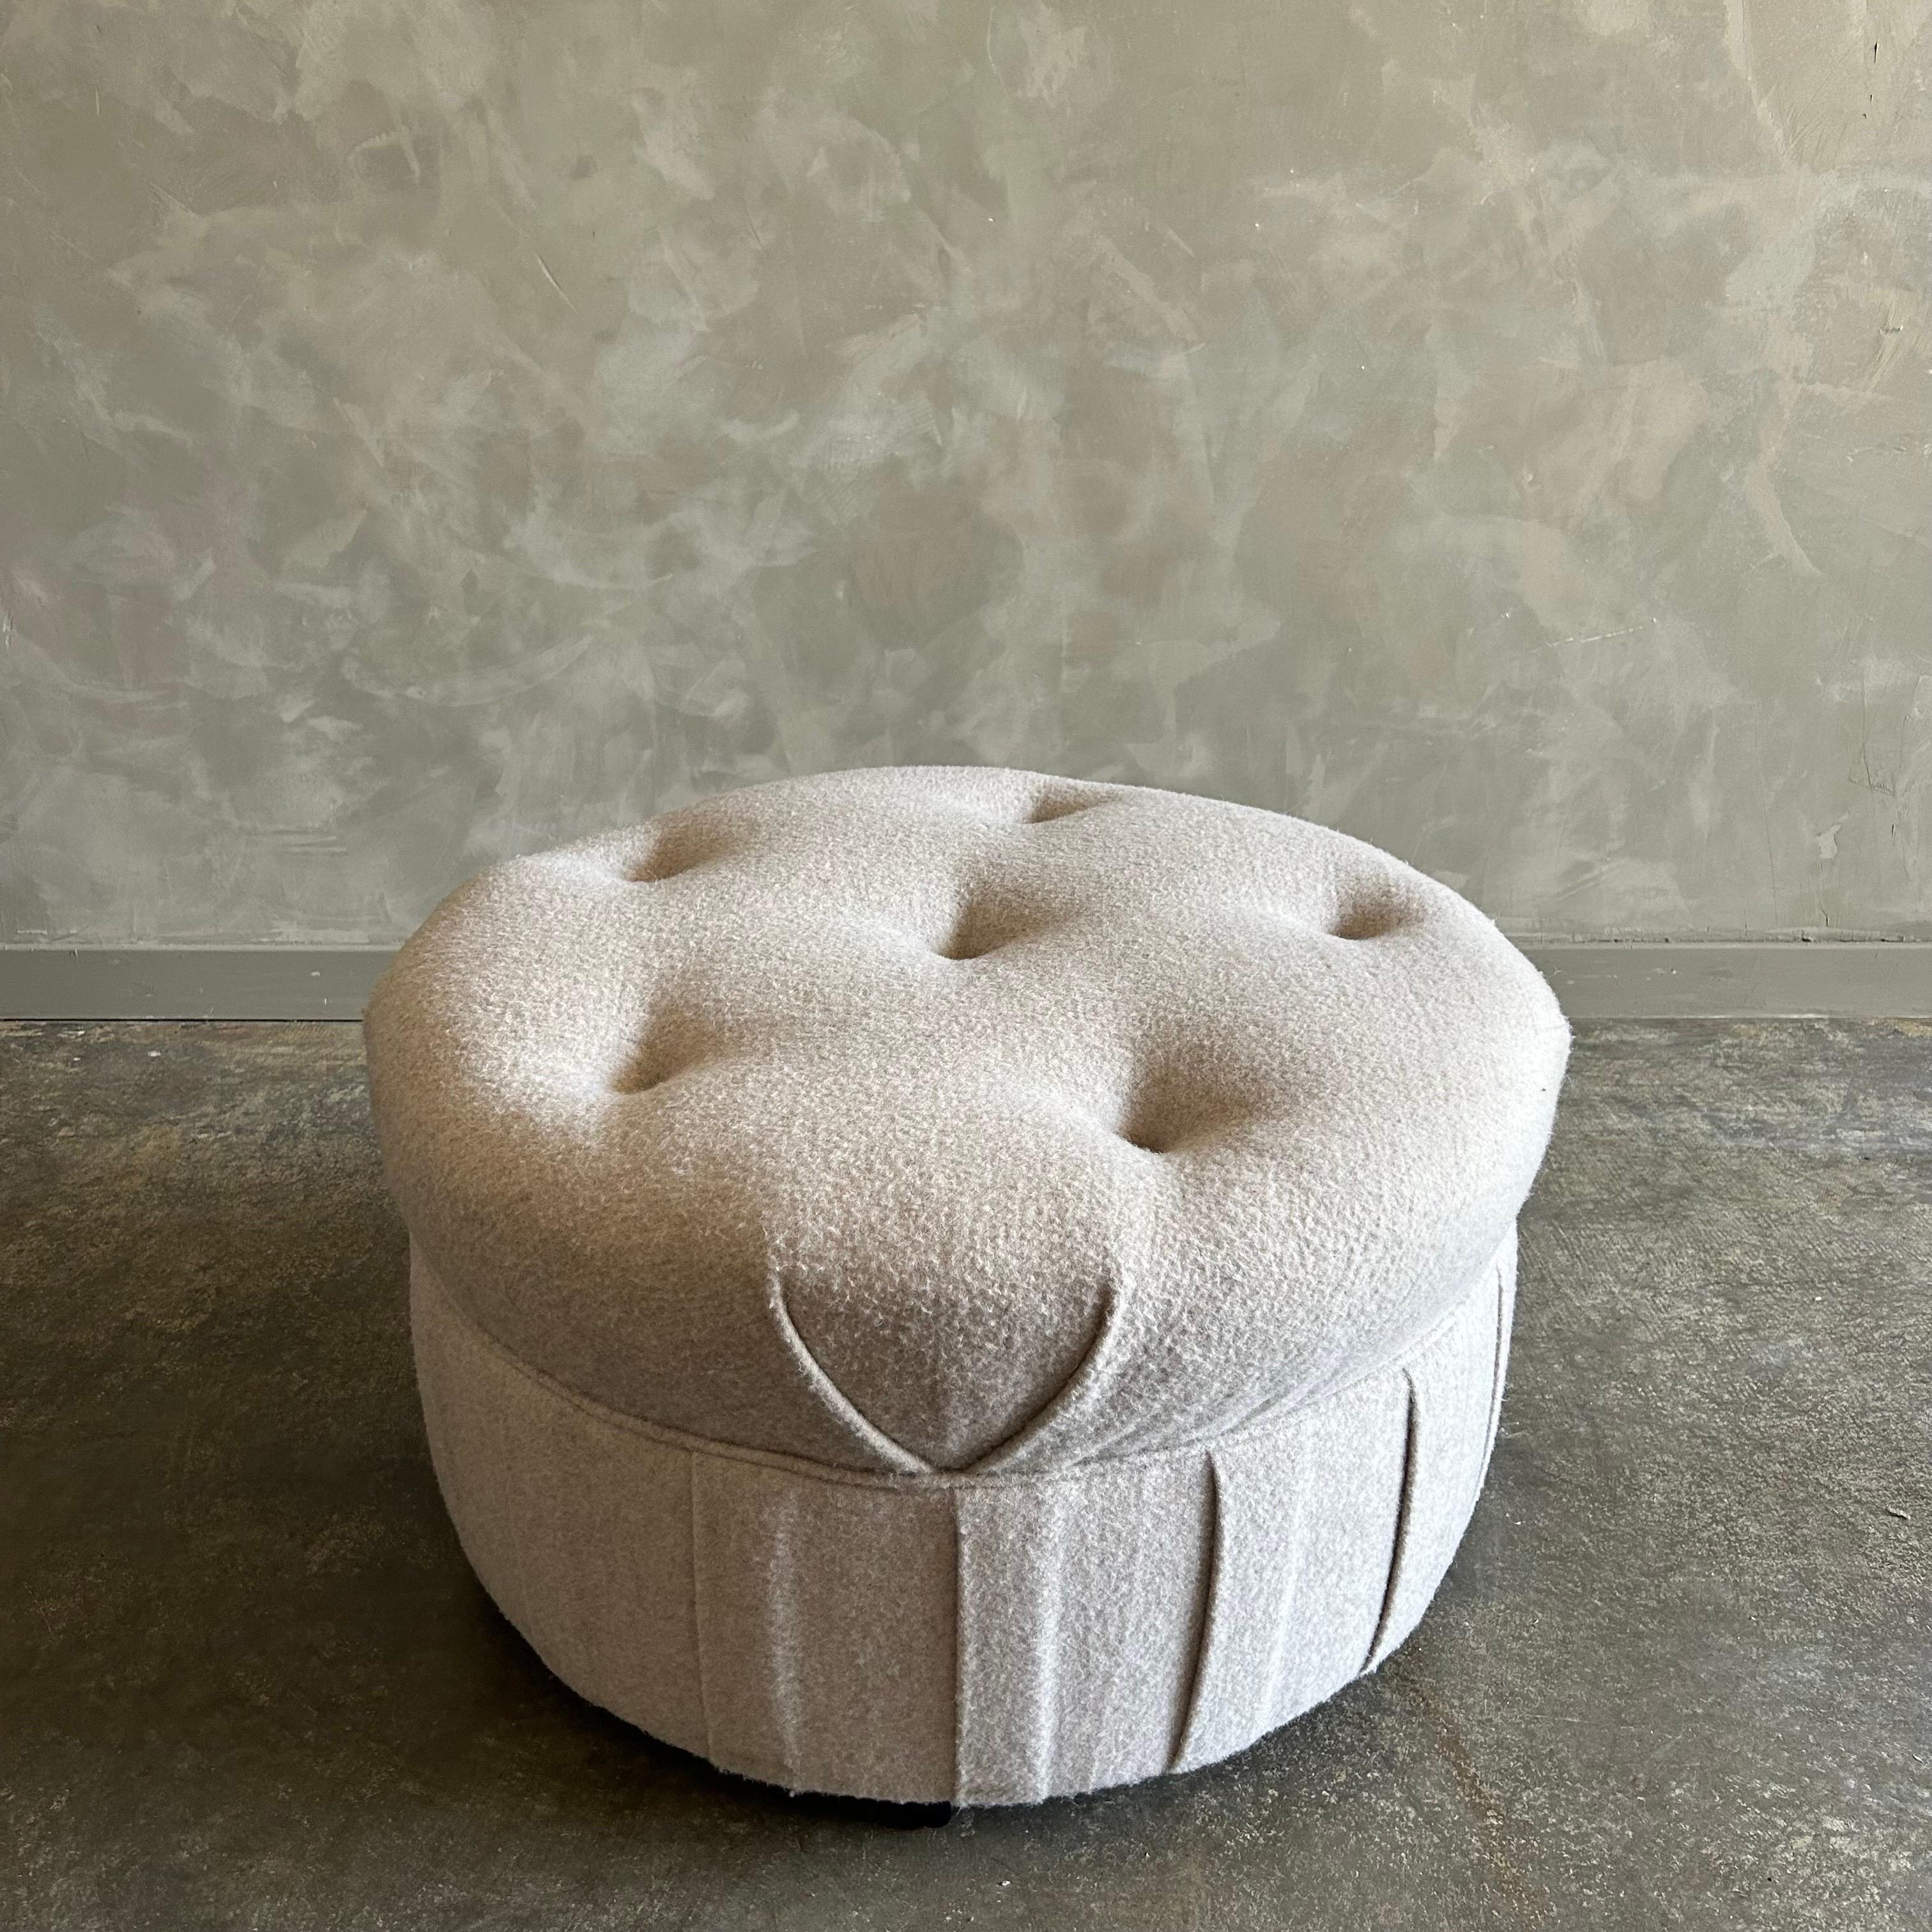 Custom Upholstered Round tufted ottoman
Size 32” rd. X 18”h
Upholstered in a natural oat wool, with hand tufting, and a box pleated apron.
This ottoman works well in a dressing room, and has rollers on the bottom.
The rollers can be removed.
Can be